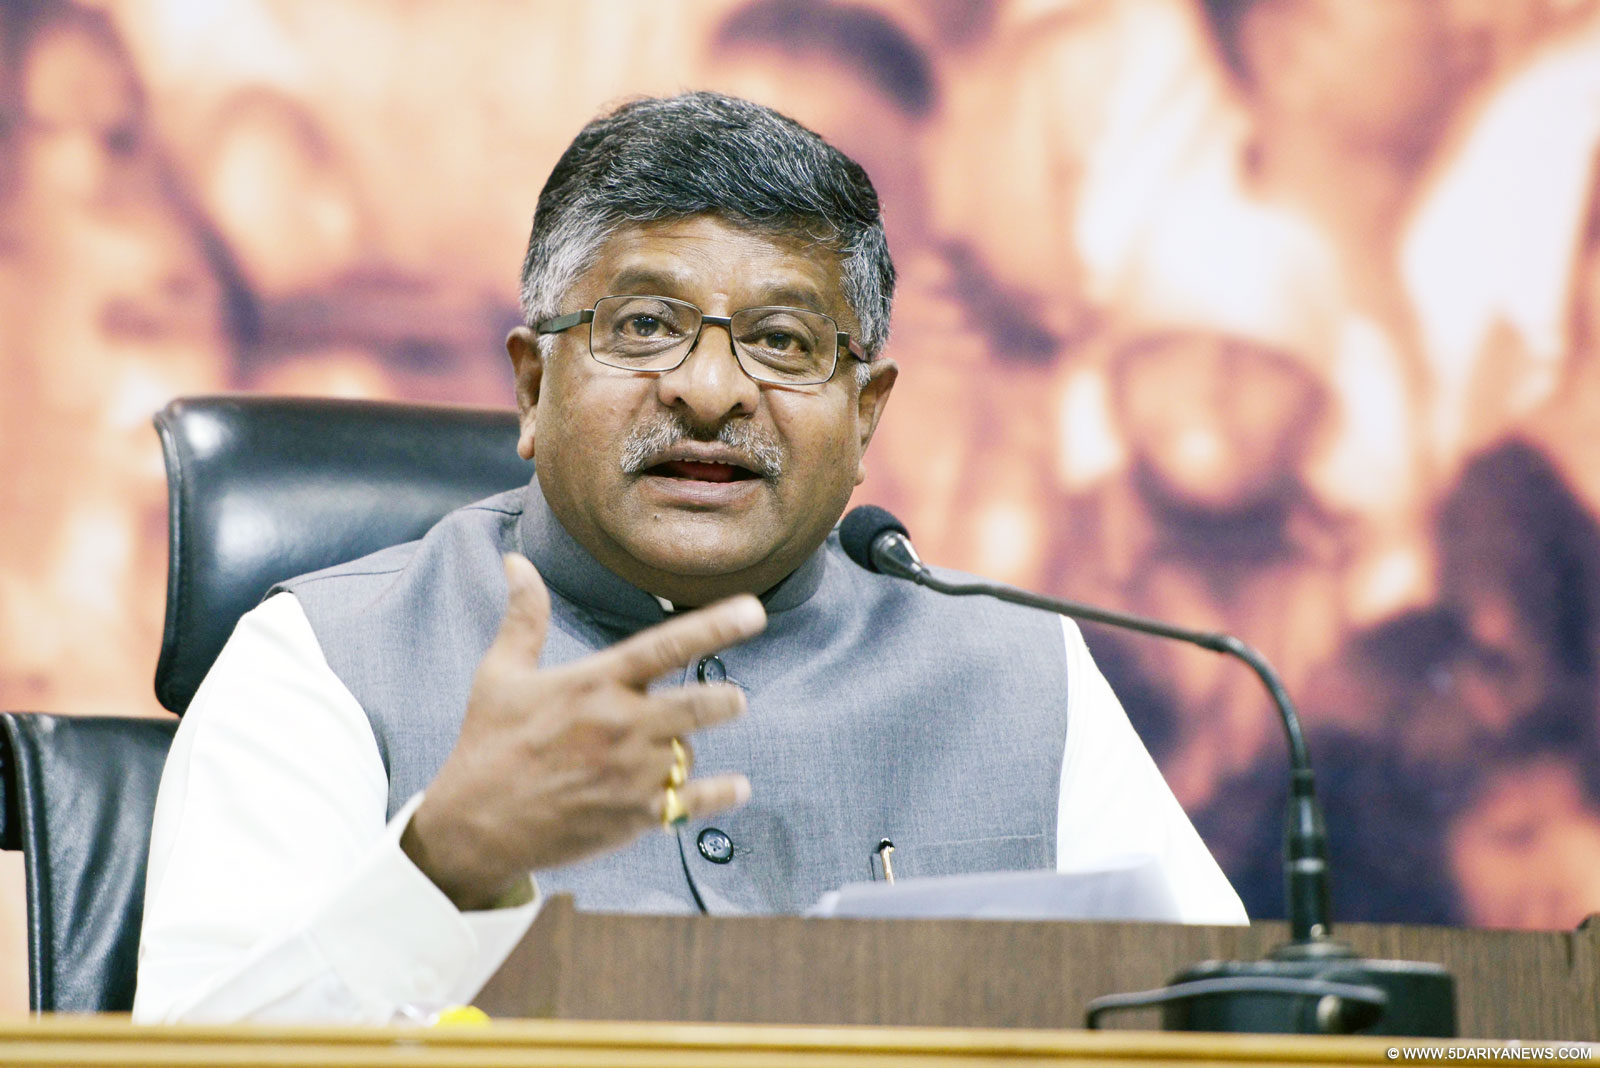 Ravi Shankar Prasad addressing at the inauguration of the workshop on Collaboration with State Administrative Training Institutes (ATIs) and Apex/Central Training Institutes (CTIs), in New Delhi on December 14, 2015.